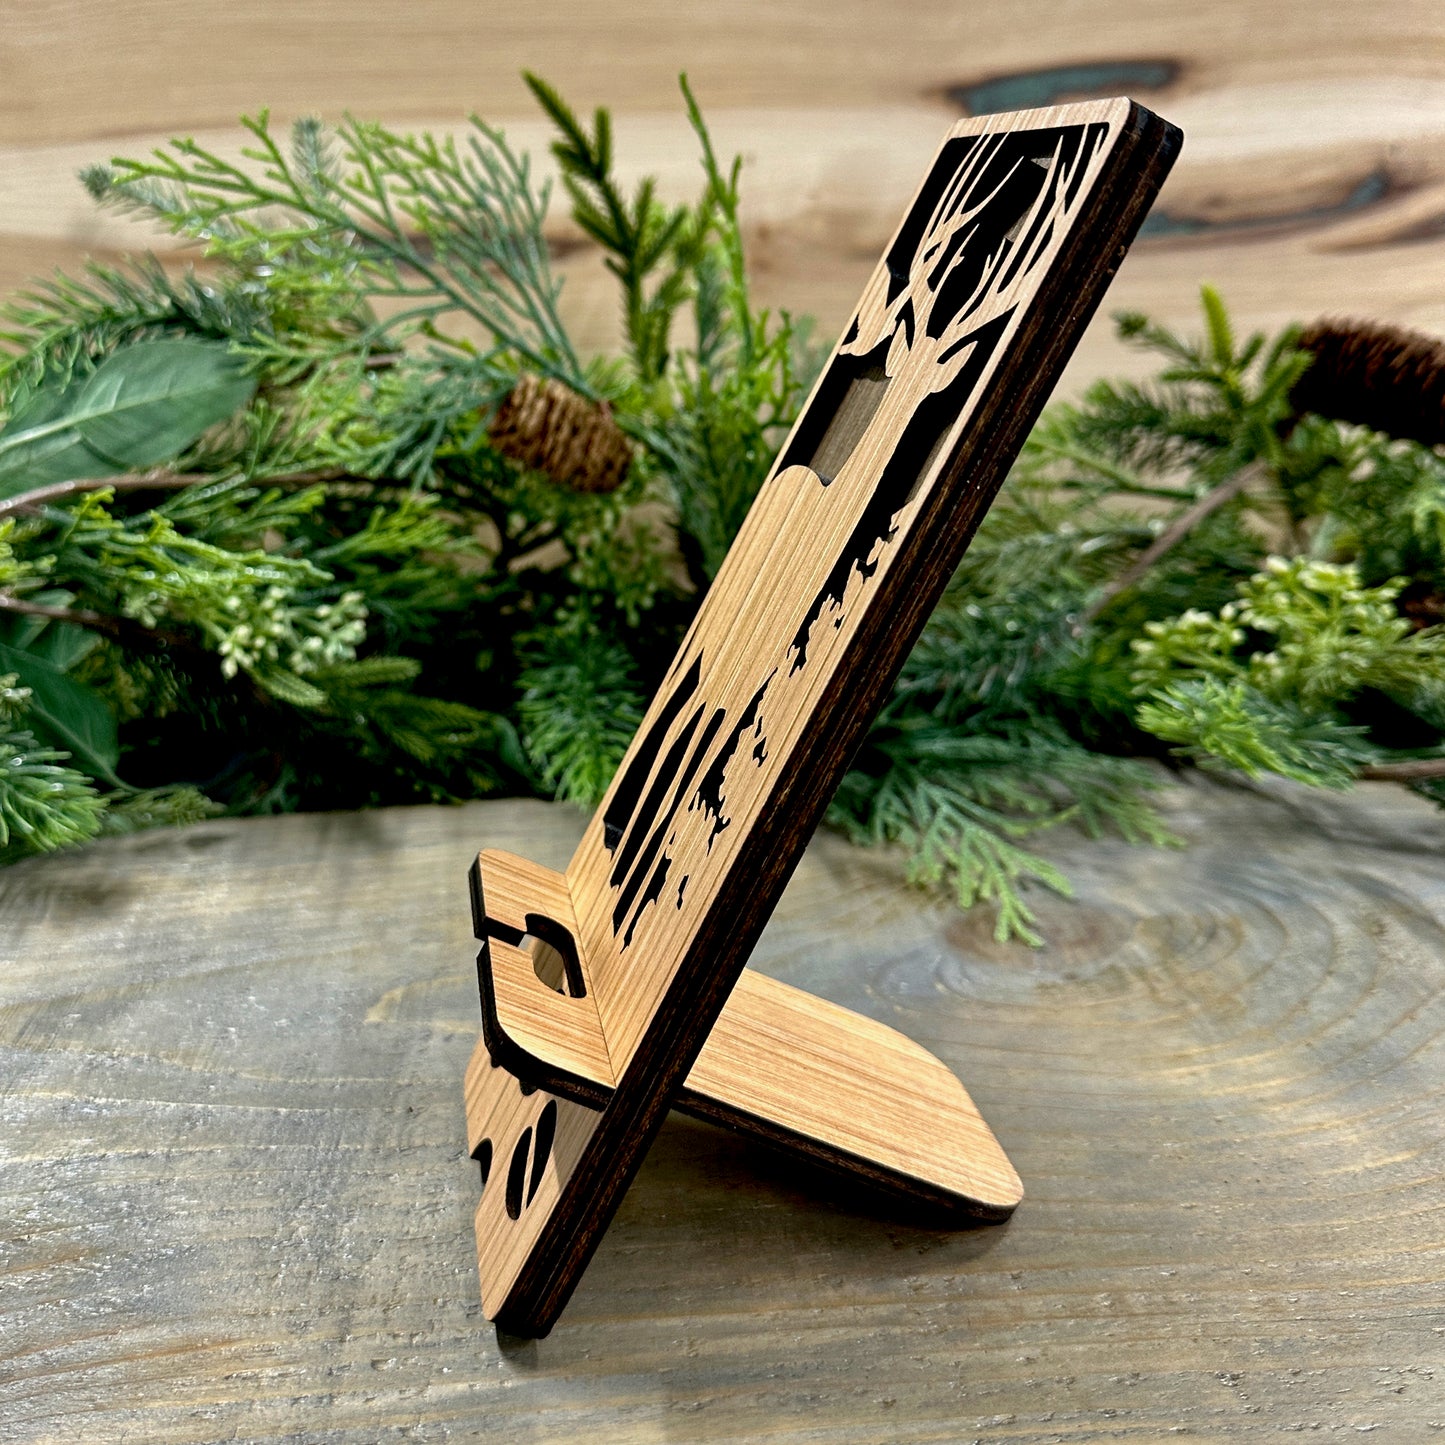 Wood Phone Stand and Decor - Whitetail Buck